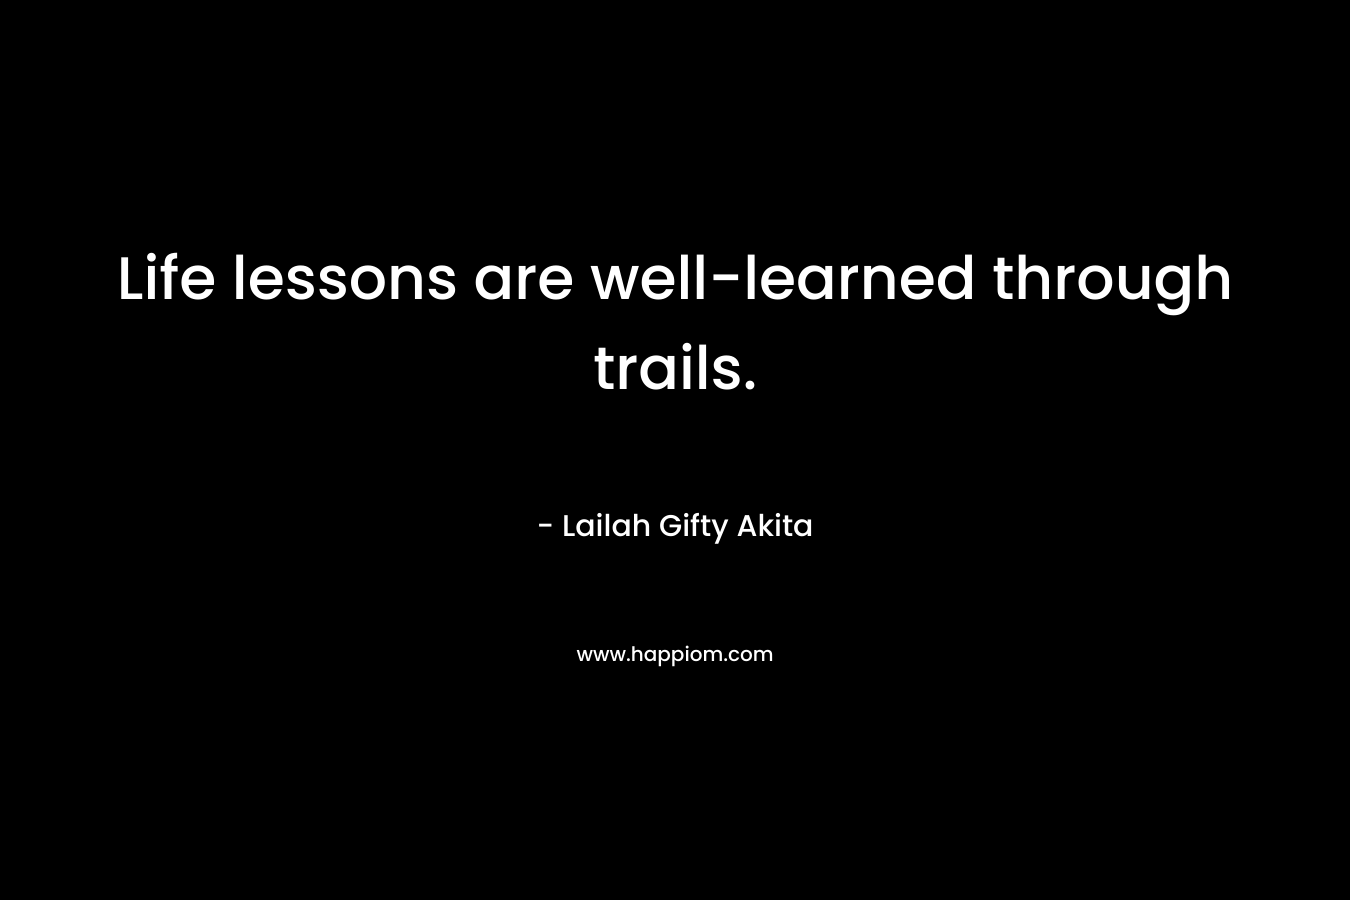 Life lessons are well-learned through trails.